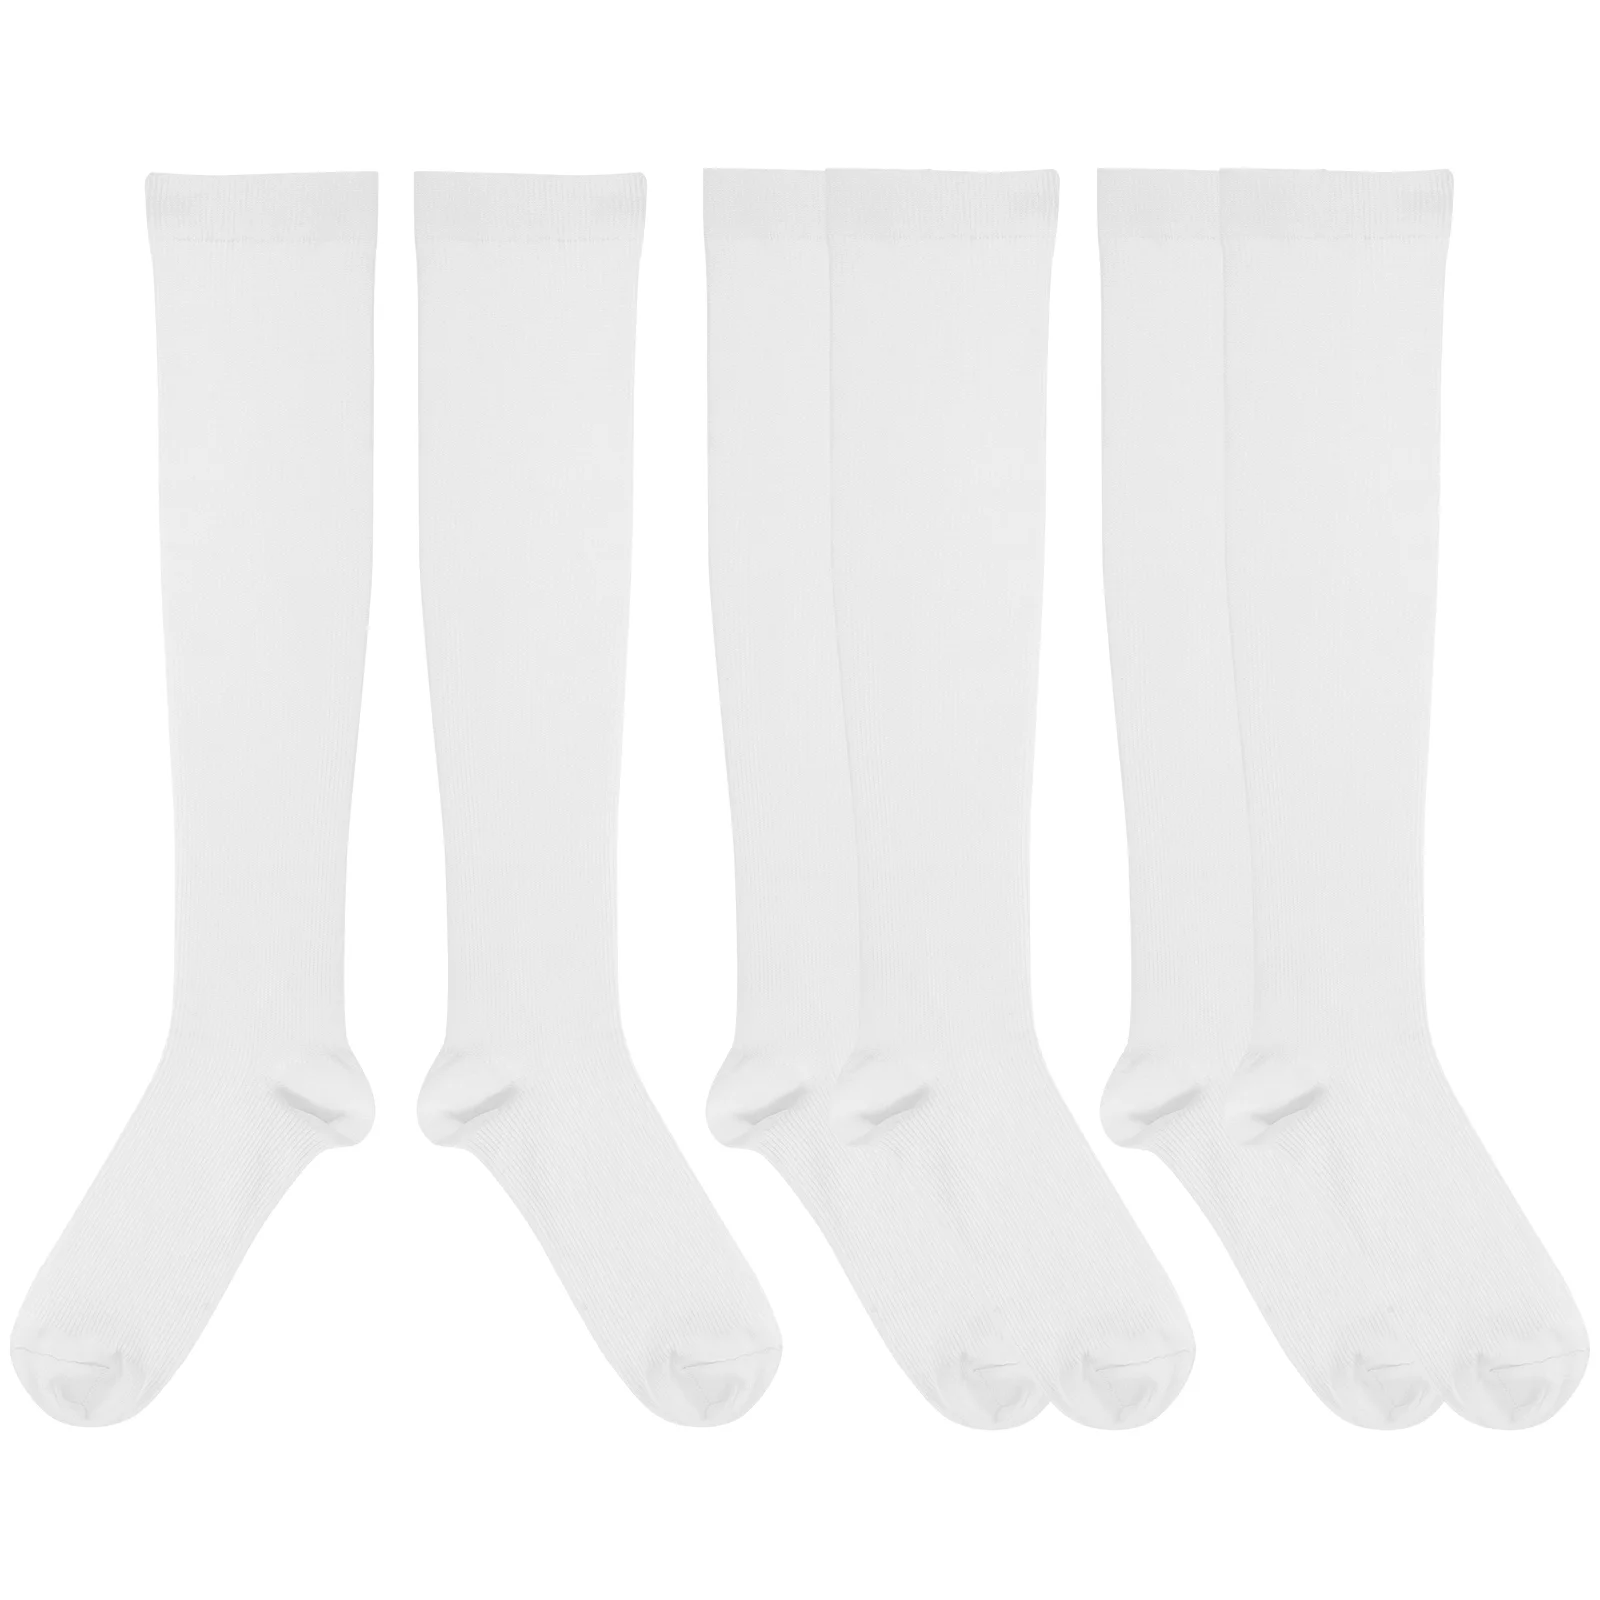 

3 Pairs Men Fencing Socks Sports for Soccer Compression Calf Tube Knee High Running Polyester Football Man White